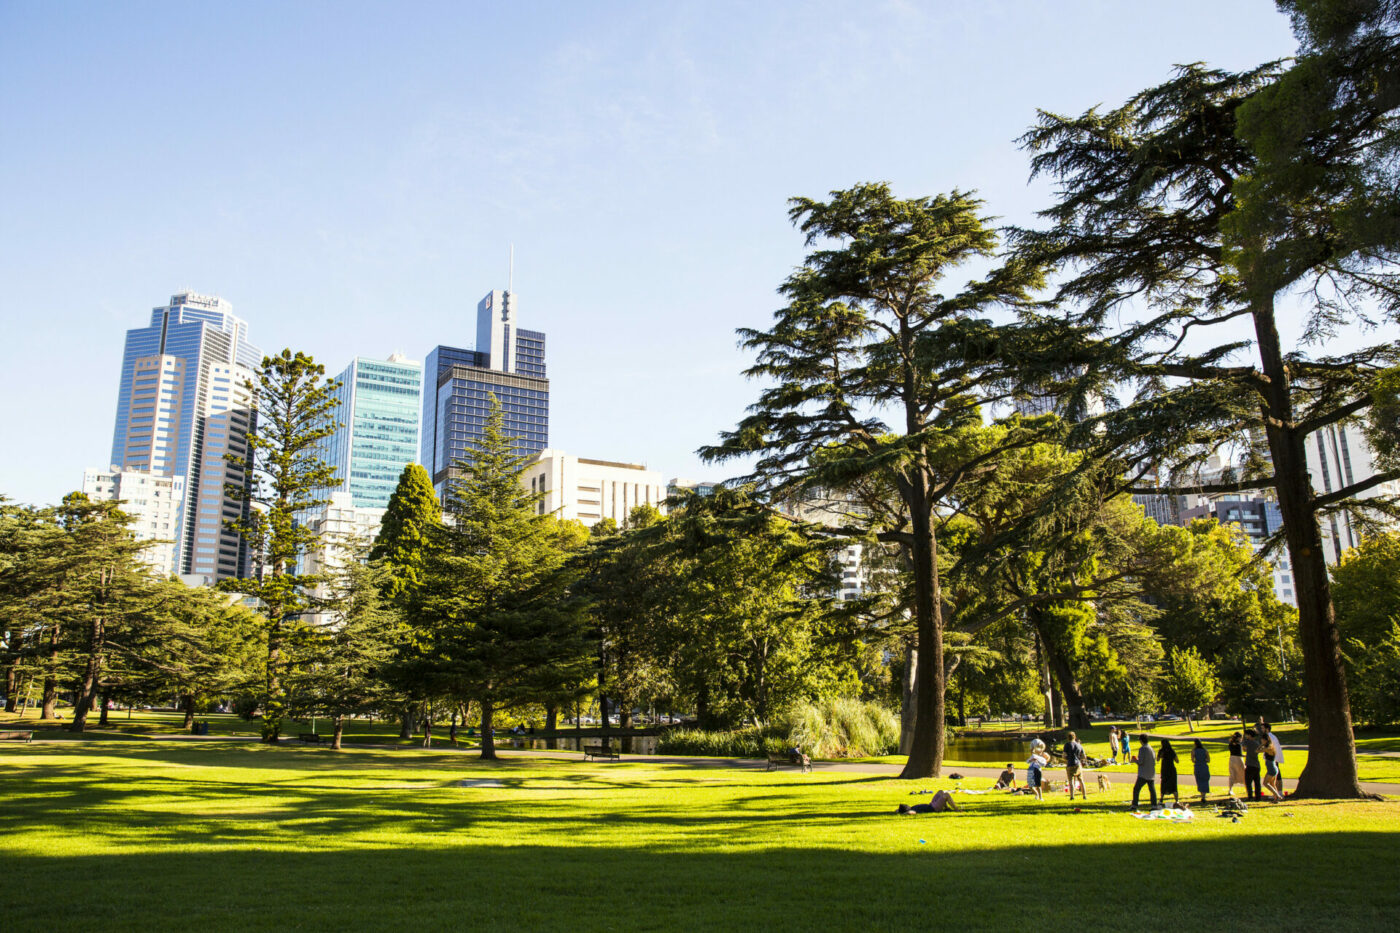 carlton gardens, things to do in melbourne